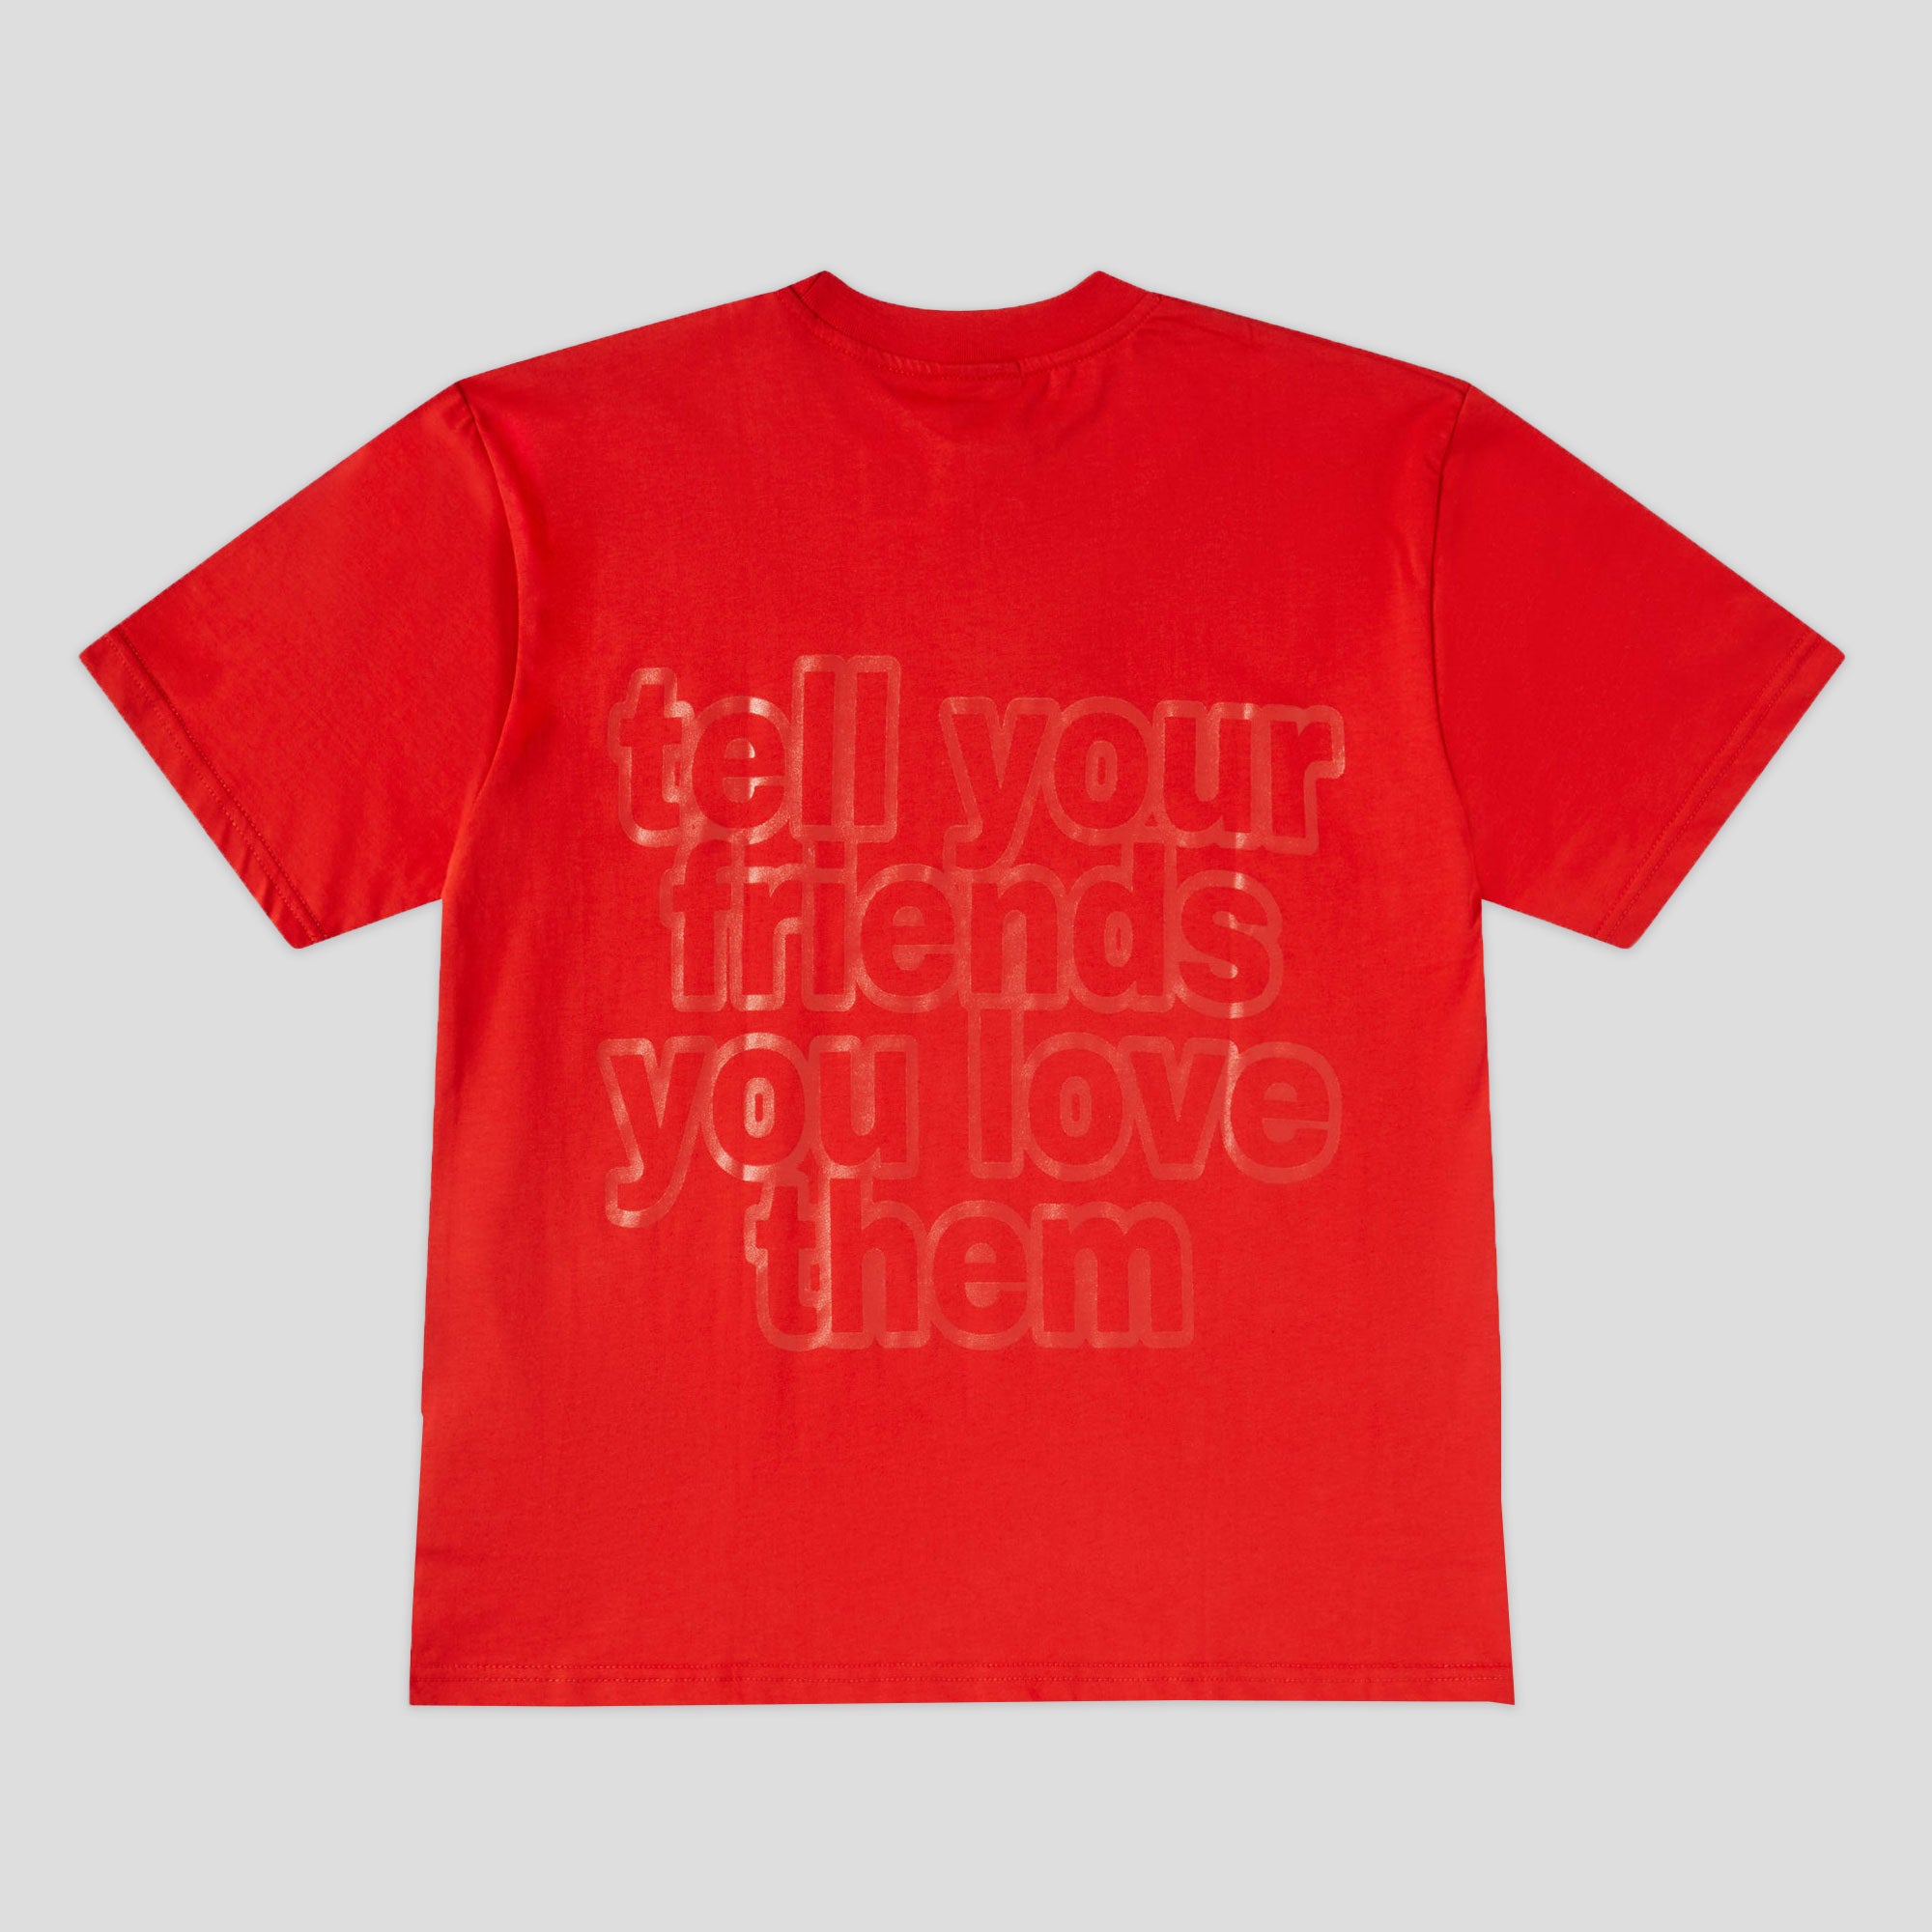 Always Do What You Should Do TYFYLT T-Shirt - Red